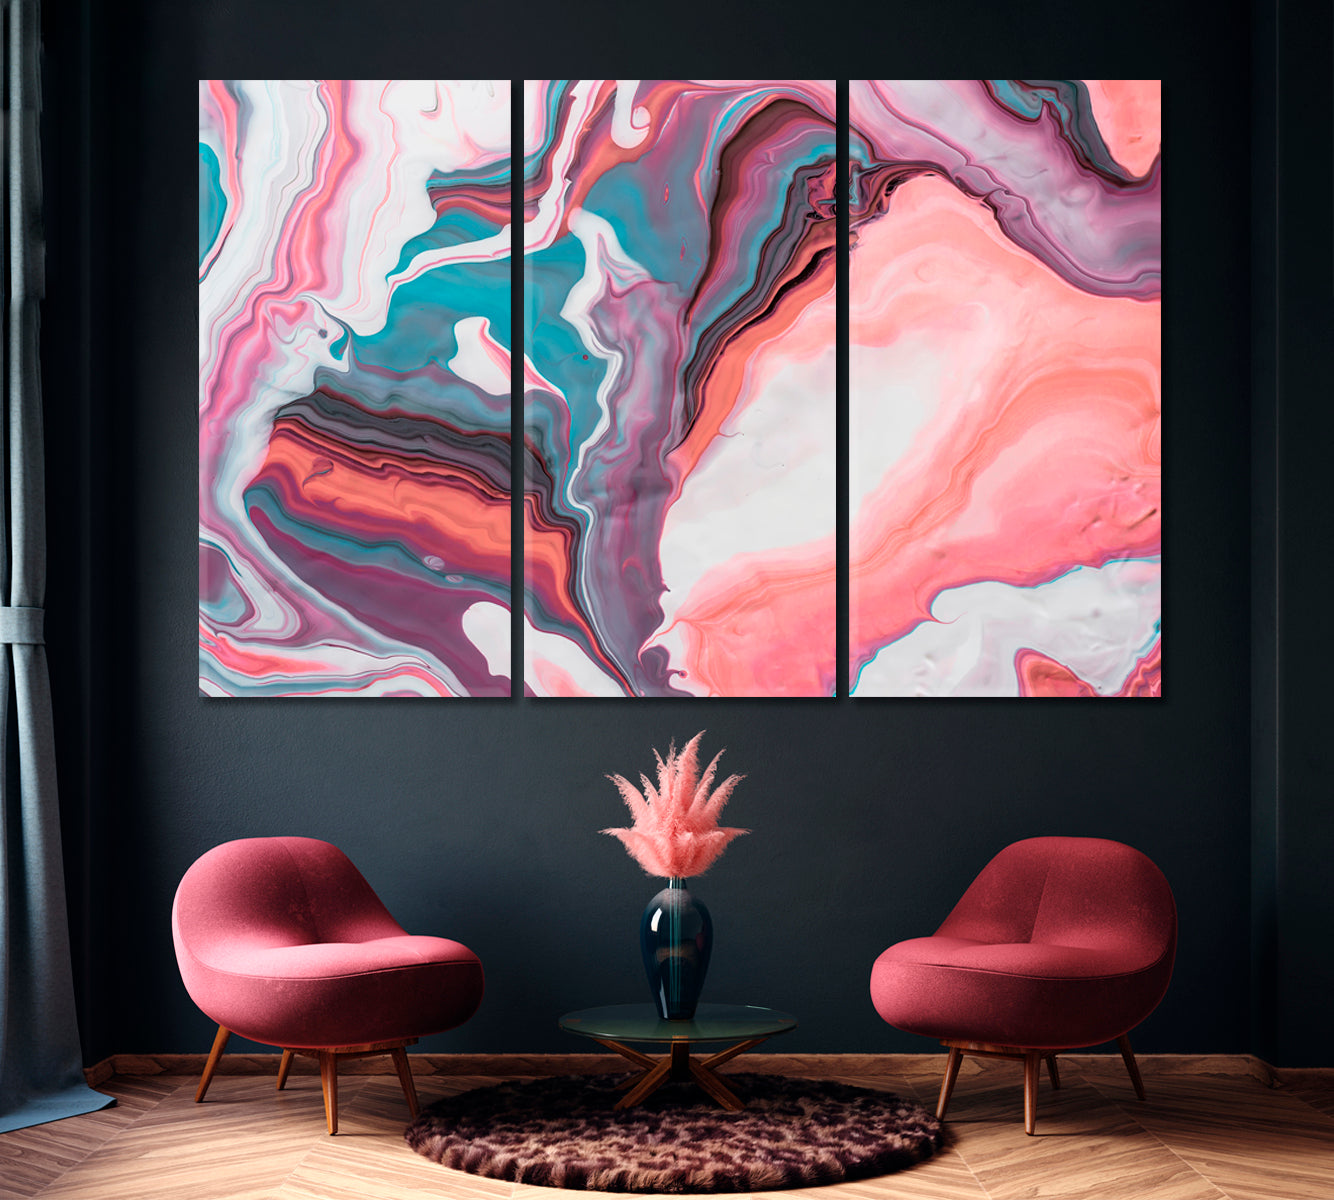 Pastel Colors Abstract Fluid Waves Canvas Print ArtLexy 3 Panels 36"x24" inches 